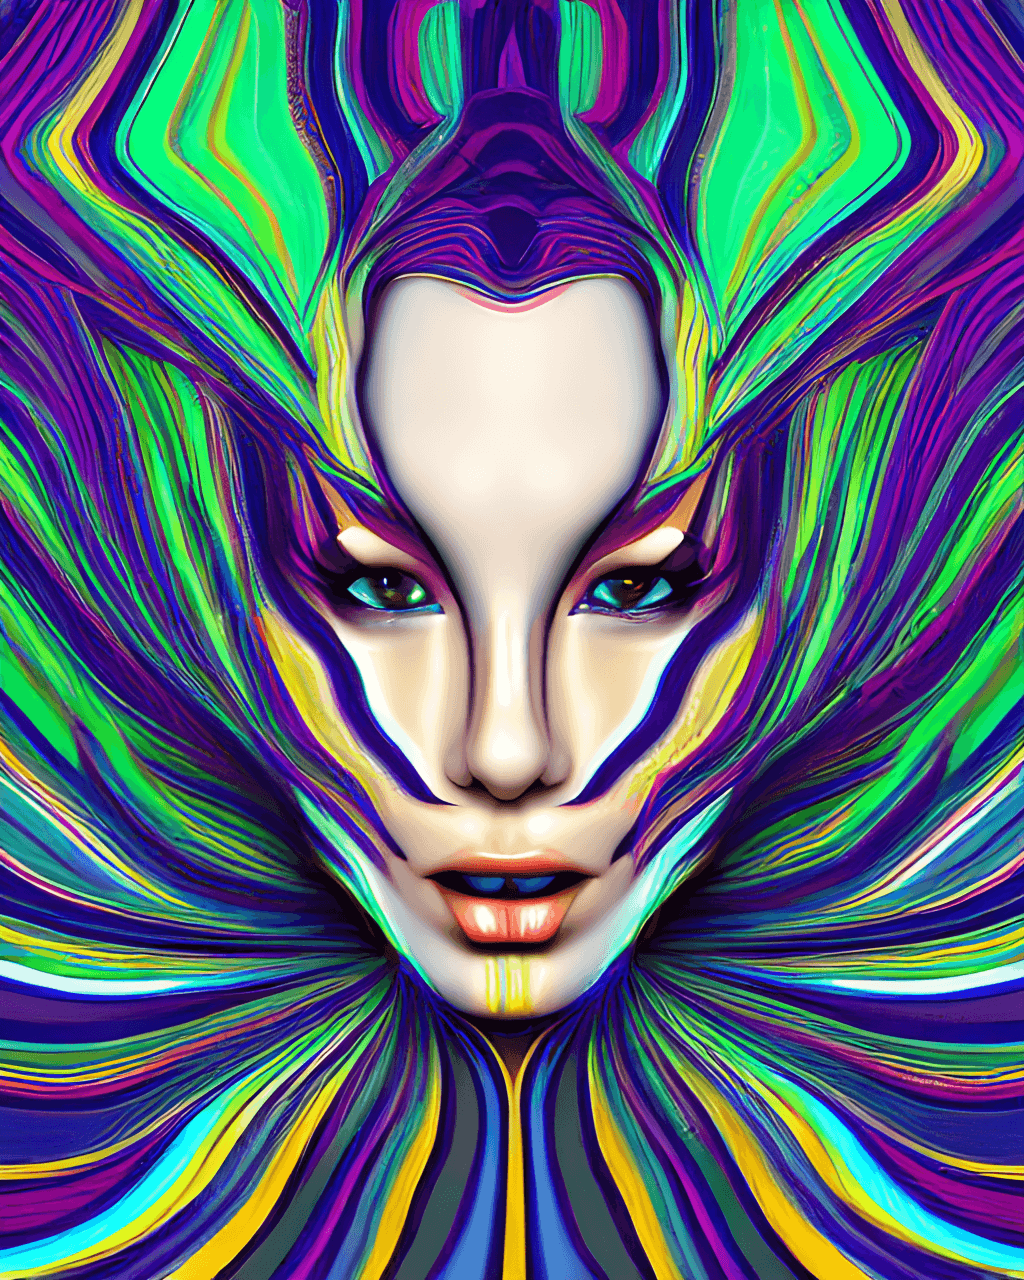 Beautiful Female Face Made of Illusory Motion Dazzle Camouflage Perlin ...